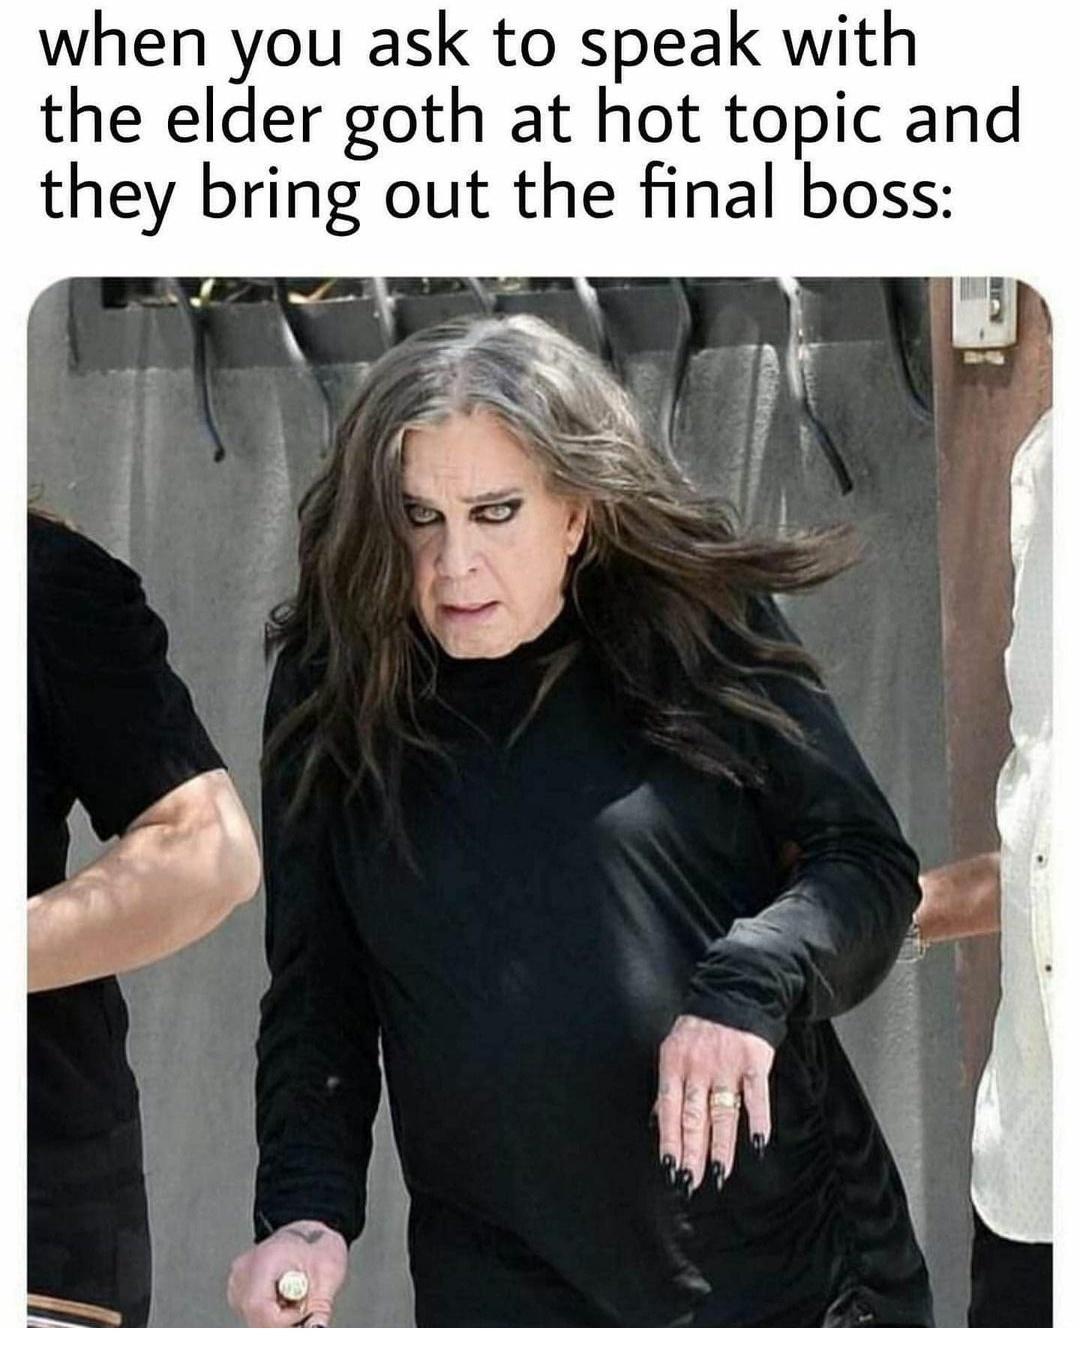 dank memes - ozzy osbourne 2022 - when you ask to speak with the elder goth at hot topic and they bring out the final boss